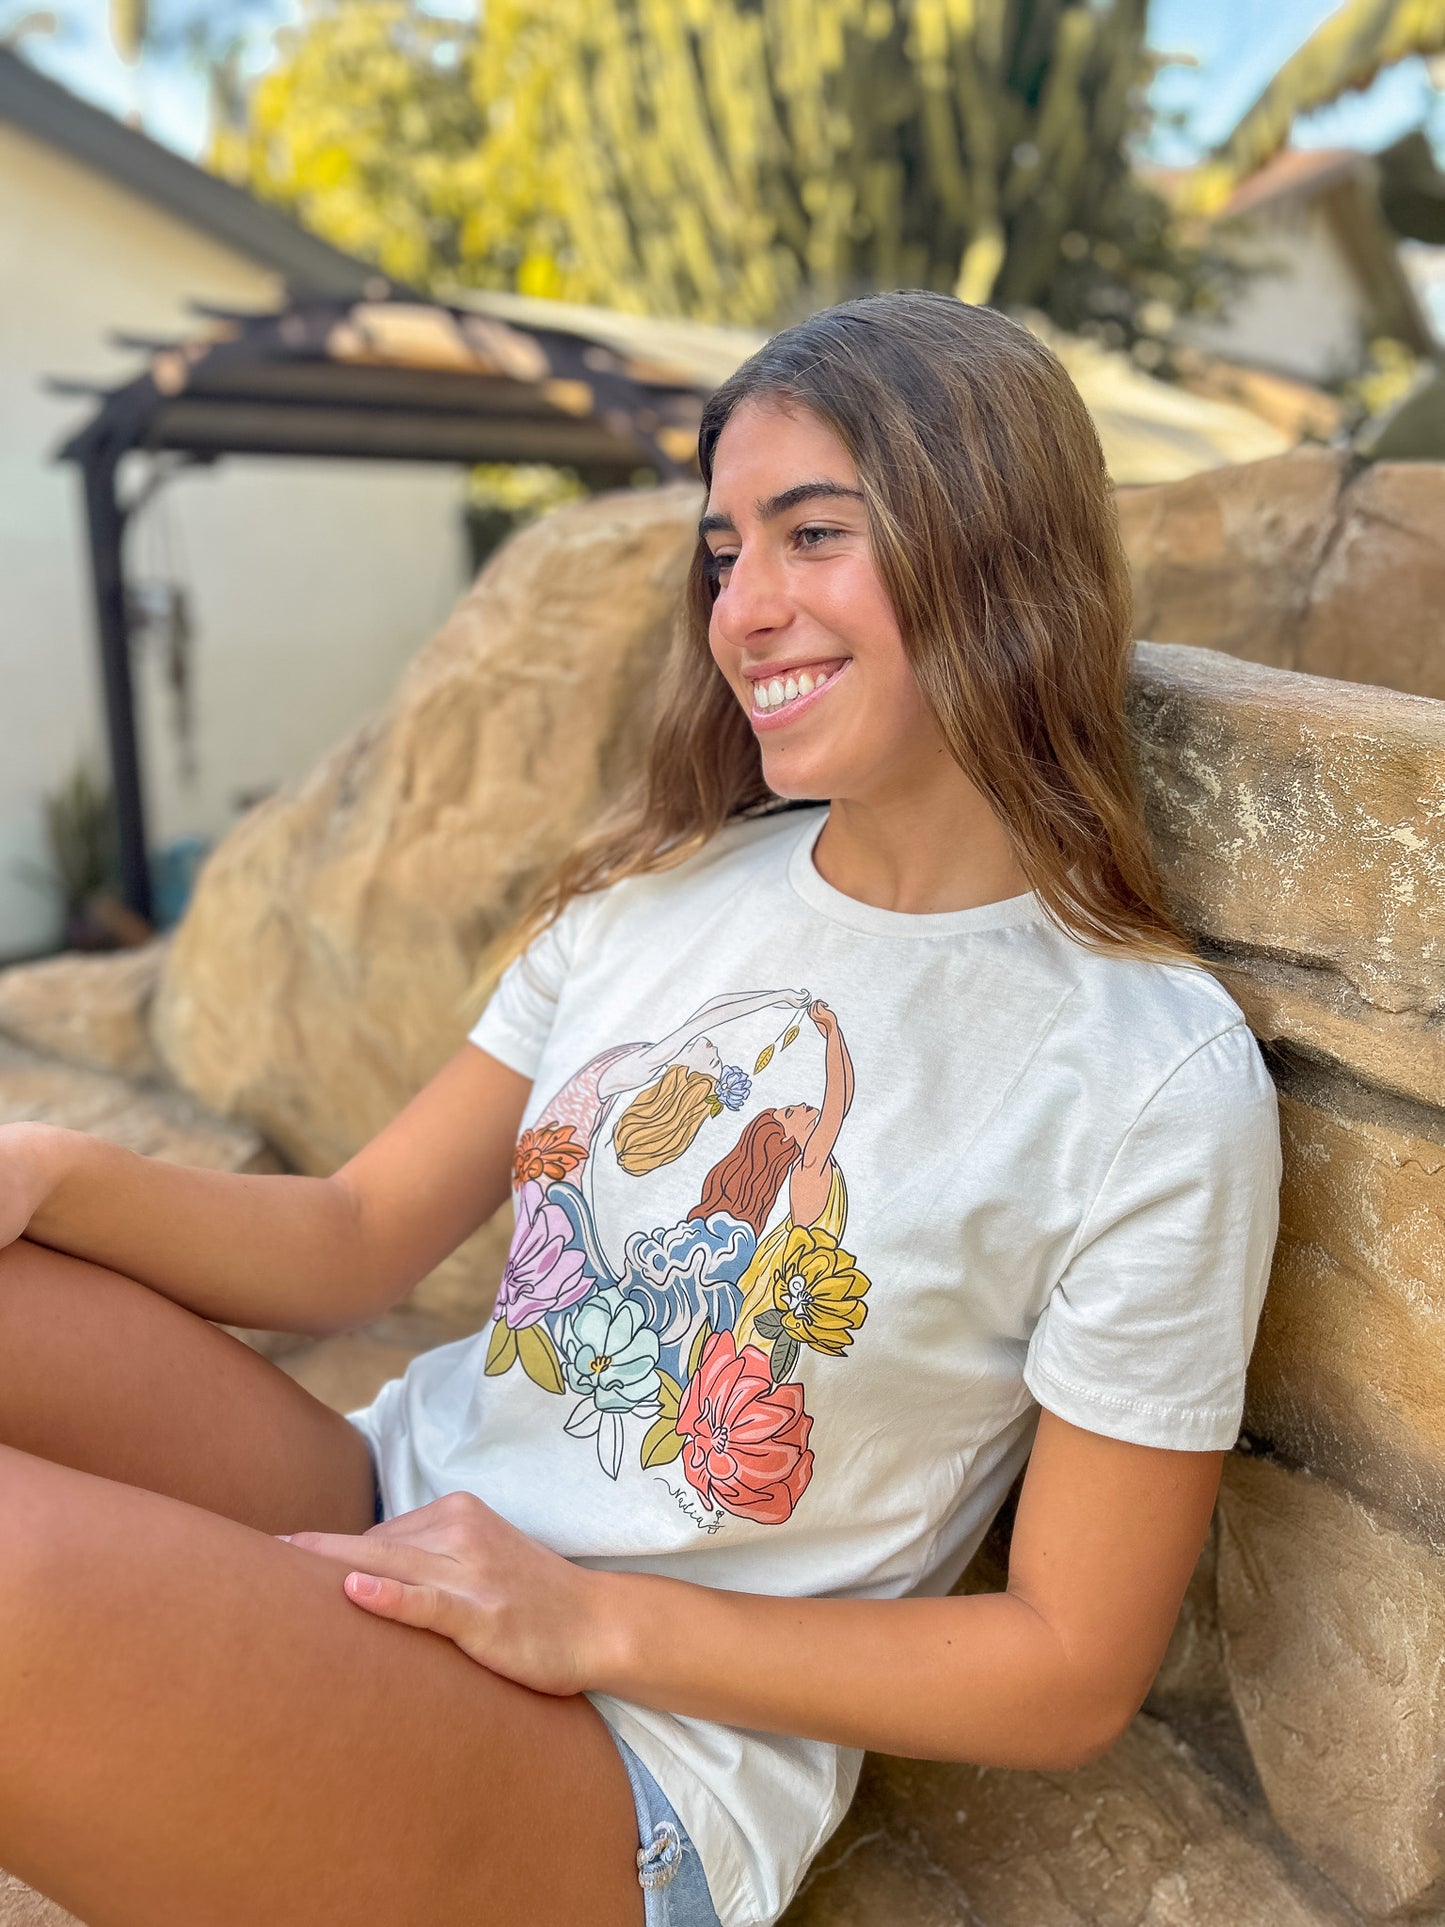 North Shore Girls Mermaid Tee. Why Graphic Tees are so popular in 2023